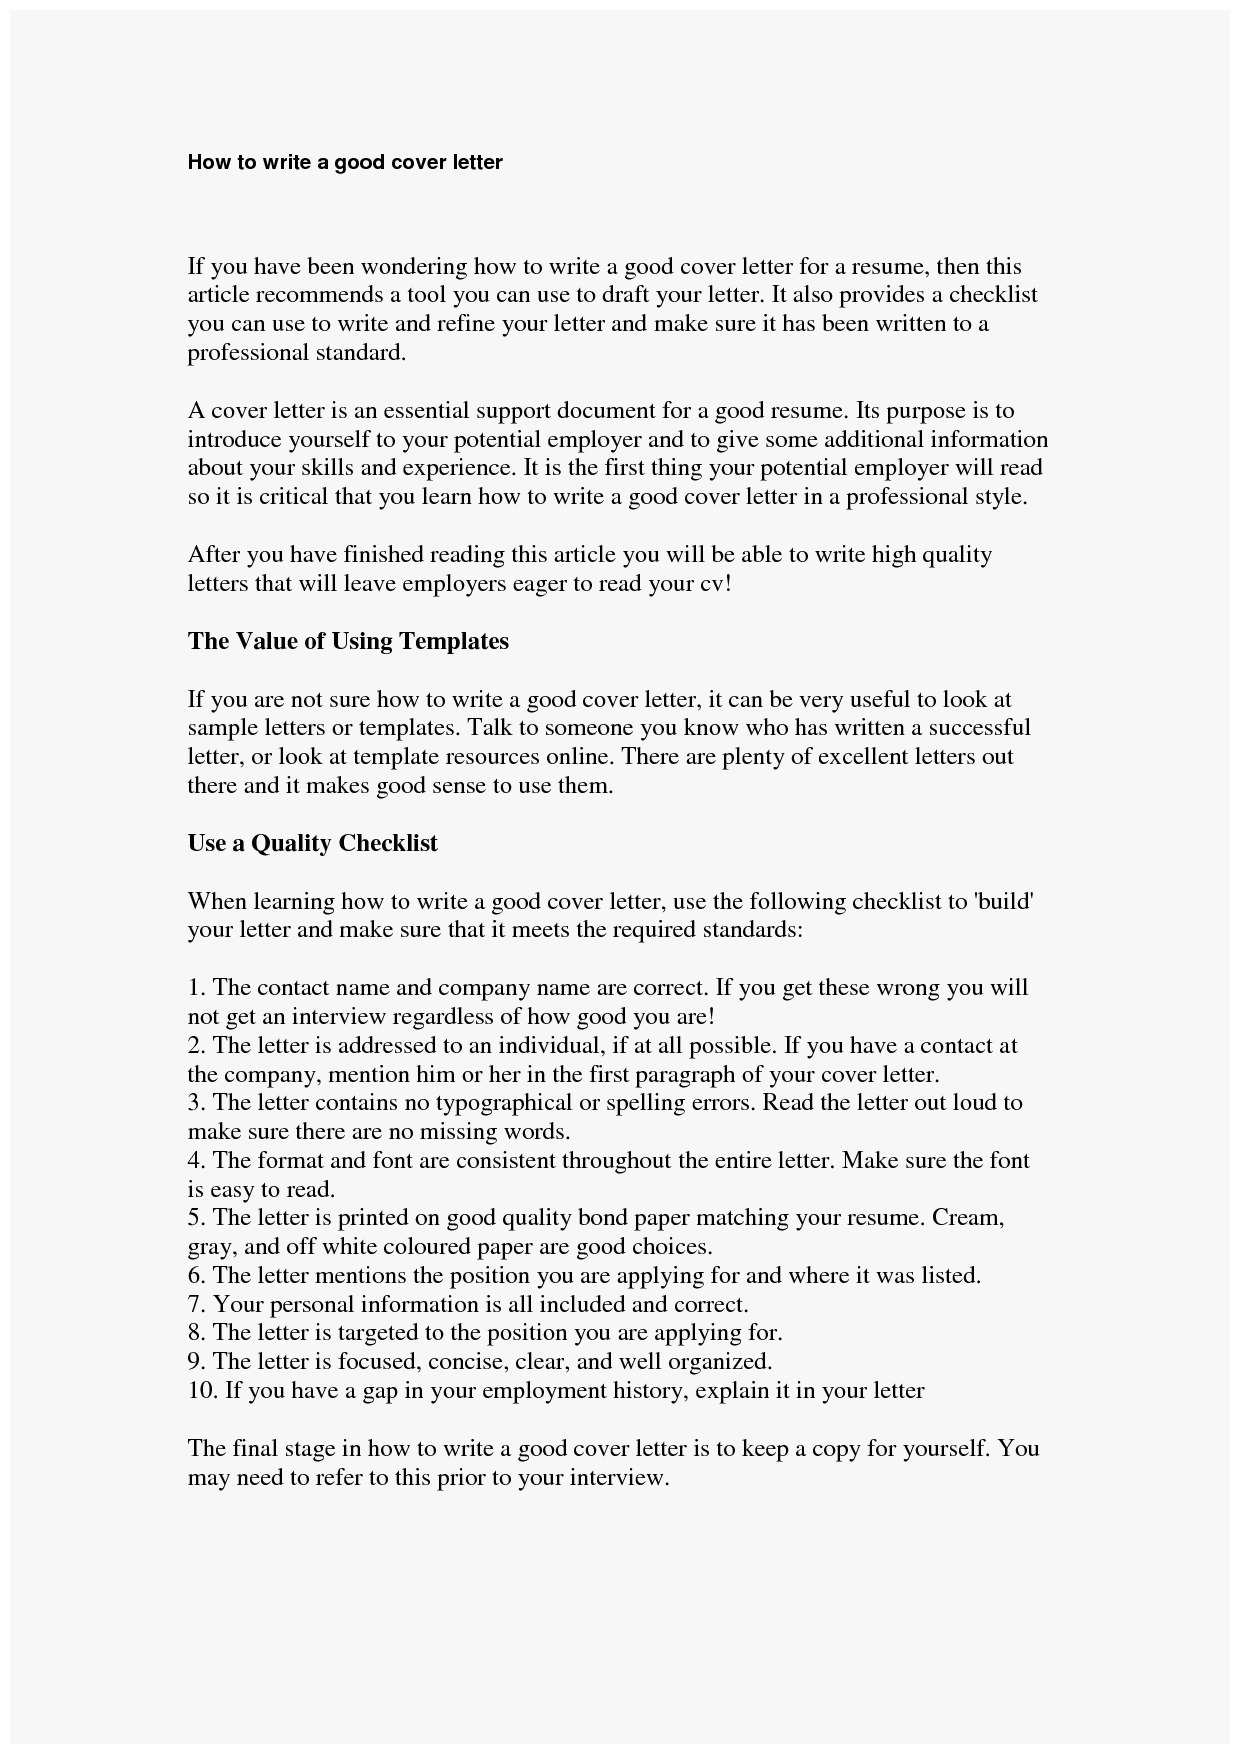 How To Write A Good Resume What Makes A Good Resume New How To Write A Good Cover Letter Of What Makes A Good Resume how to write a good resume|wikiresume.com